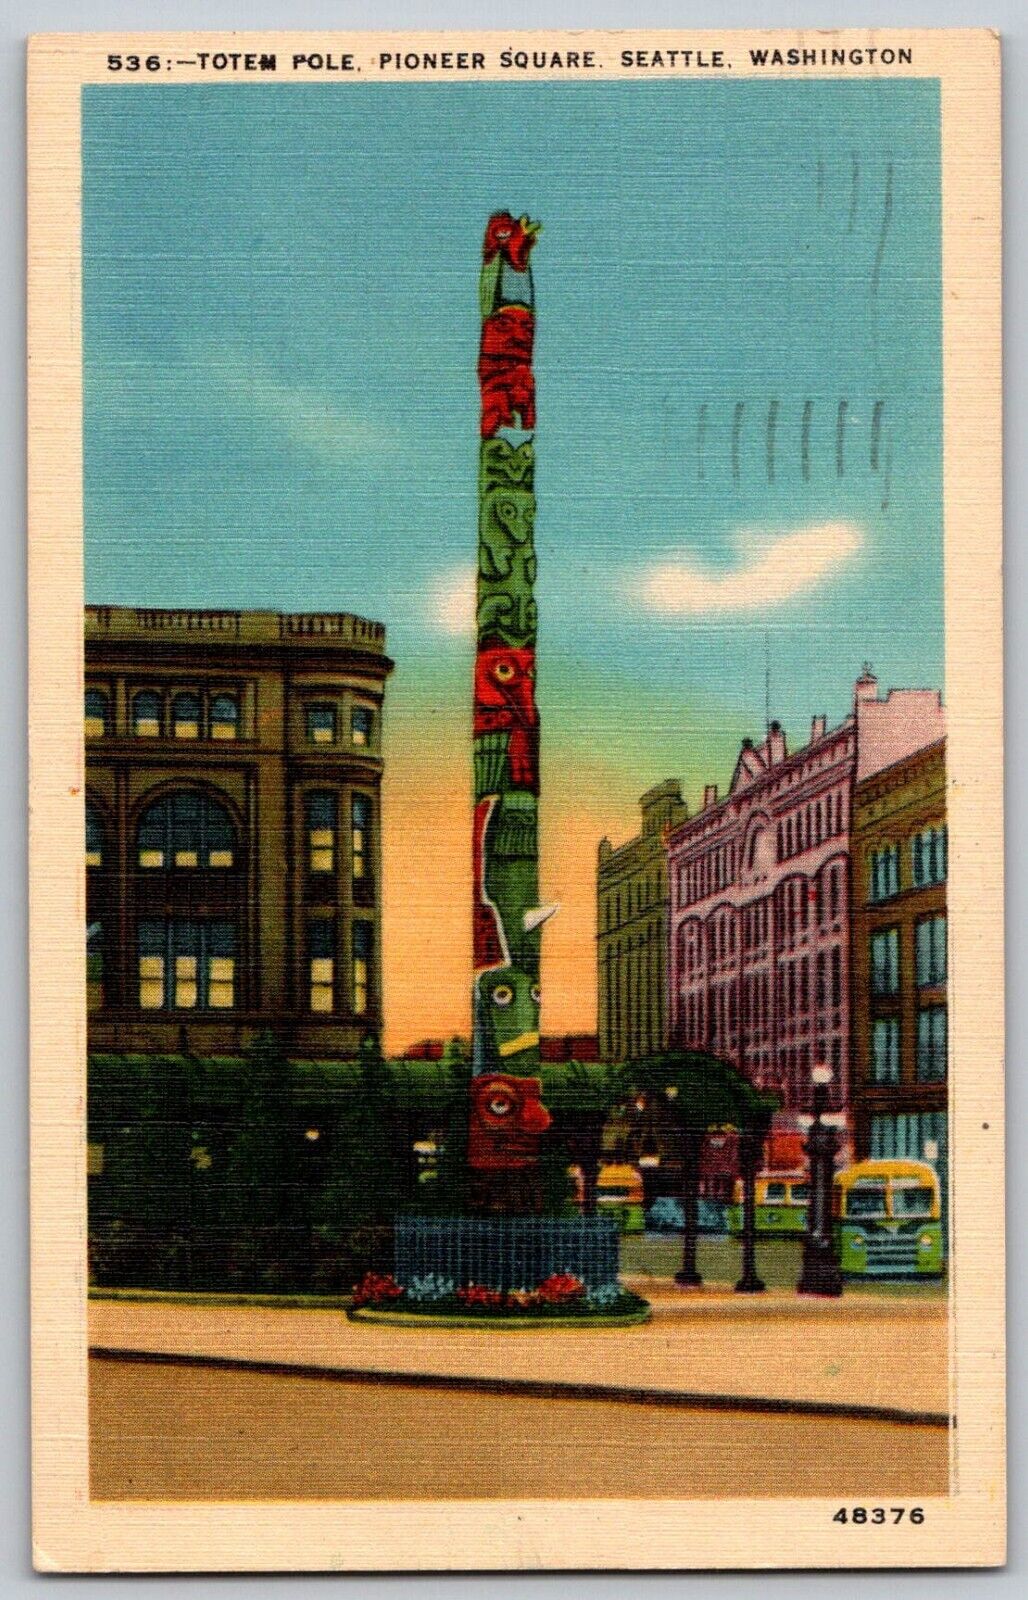 Vintage Linen Postcard - Totem Pole Pioneer Square Seattle WA - Posted 1945